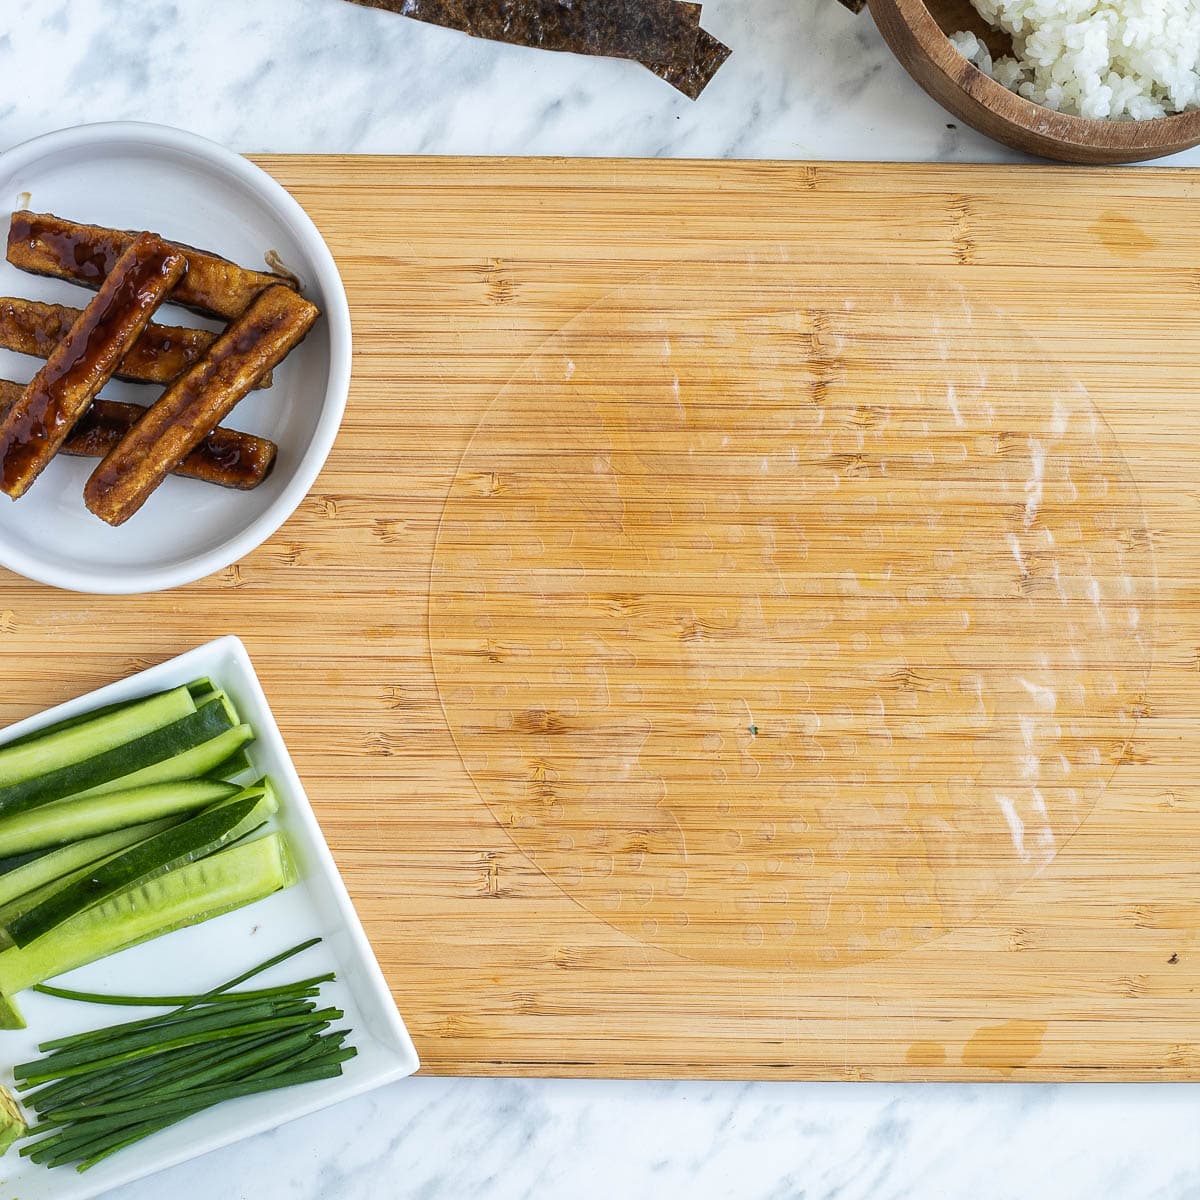 A wooden cutting board with wet rice paper. The fillings are in small bowls like rice, cucumber sticks, avocado slices, chives, brown sticky tofu steaks and nori strips.